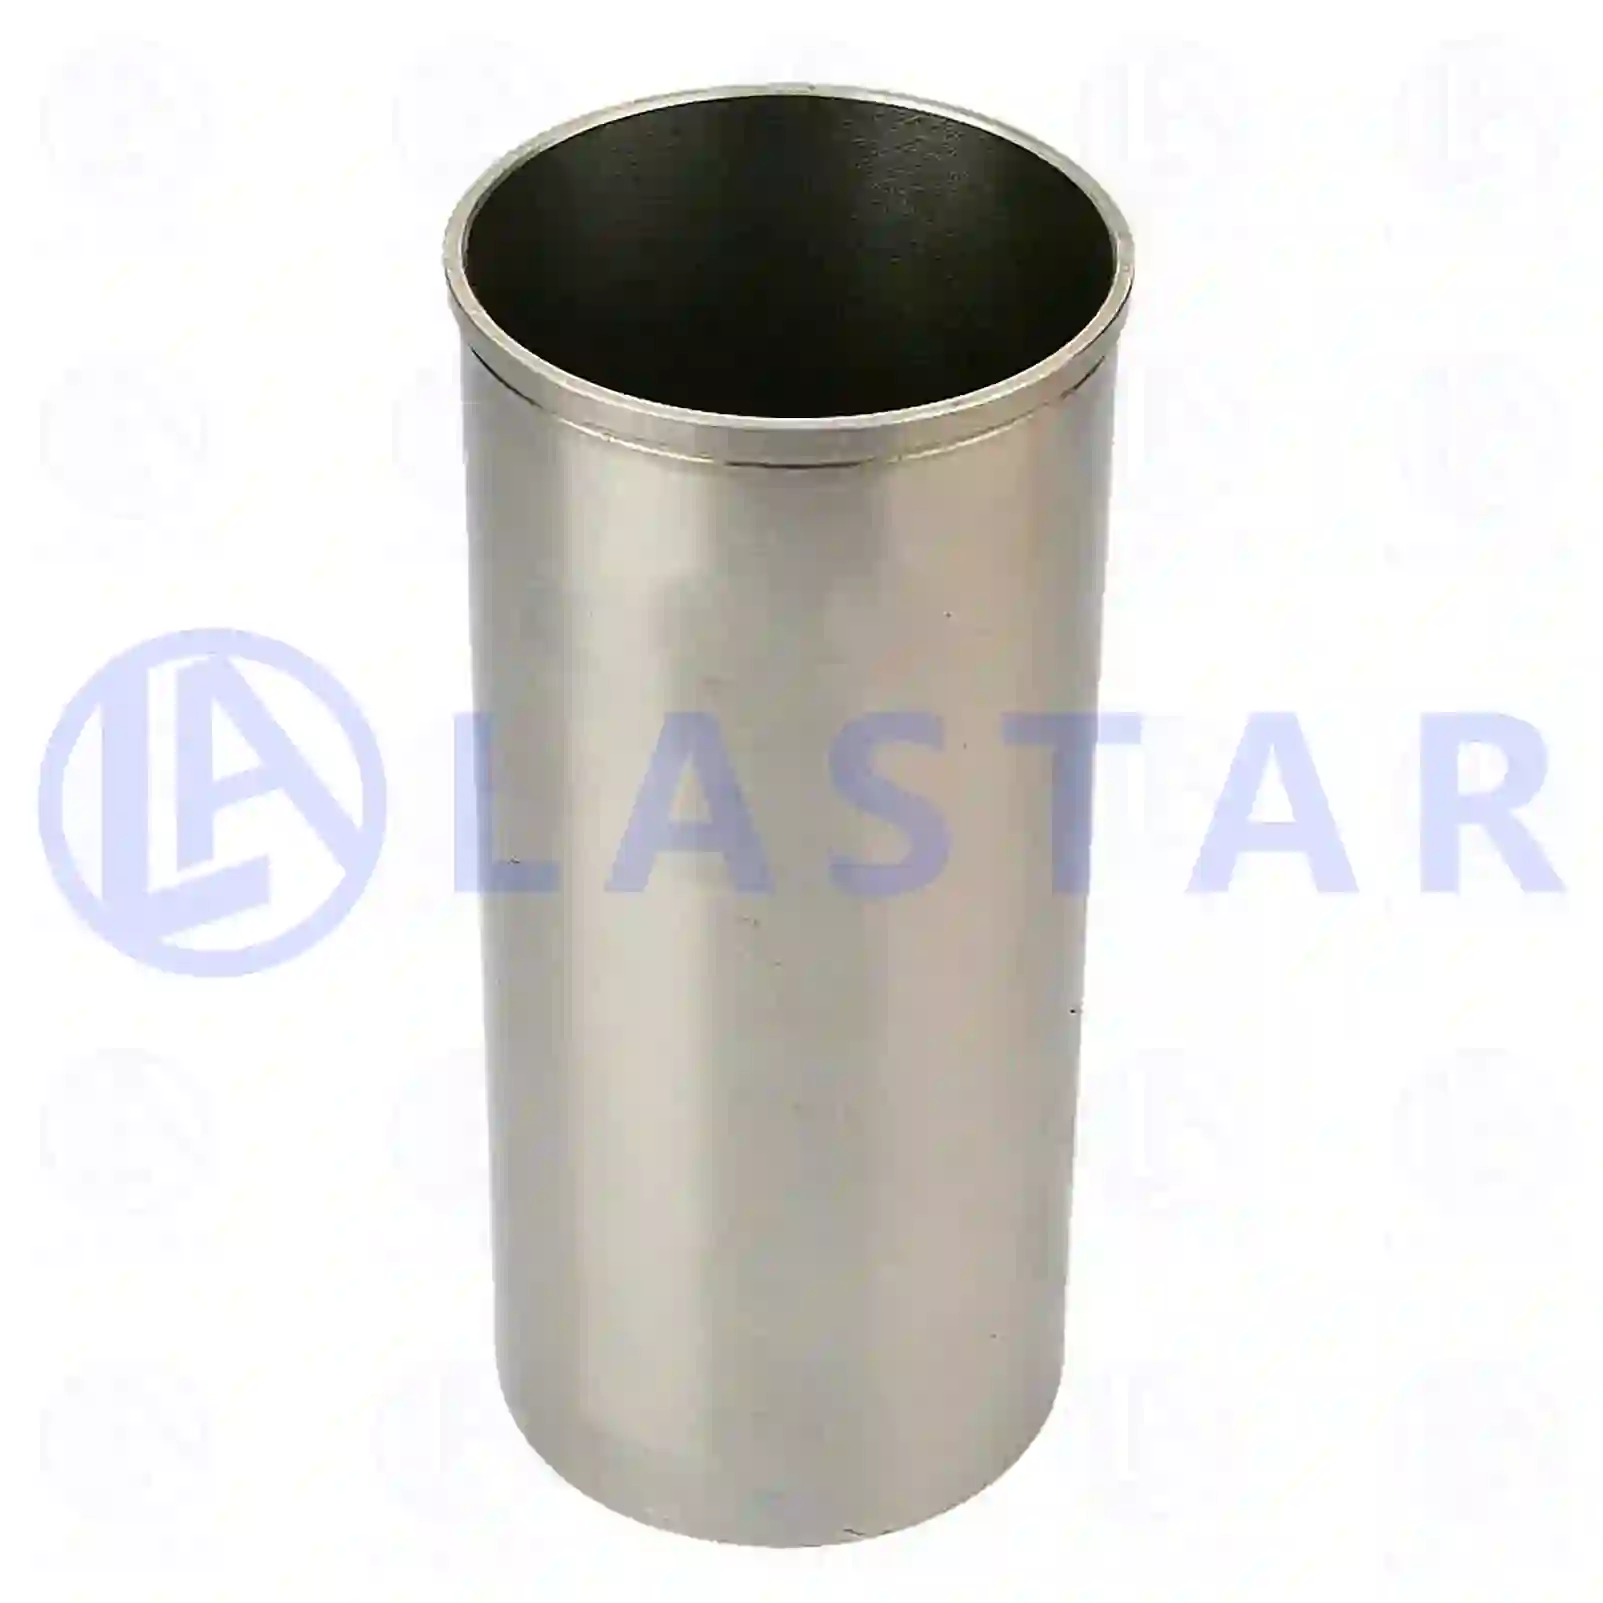 Cylinder liner, without seal rings, 77701981, 3520110310, 3520111610, 3620110110, 3620110210, 3620110310, 3620110510, 3620110610, 3660110410, 3660110510, 3660110610 ||  77701981 Lastar Spare Part | Truck Spare Parts, Auotomotive Spare Parts Cylinder liner, without seal rings, 77701981, 3520110310, 3520111610, 3620110110, 3620110210, 3620110310, 3620110510, 3620110610, 3660110410, 3660110510, 3660110610 ||  77701981 Lastar Spare Part | Truck Spare Parts, Auotomotive Spare Parts